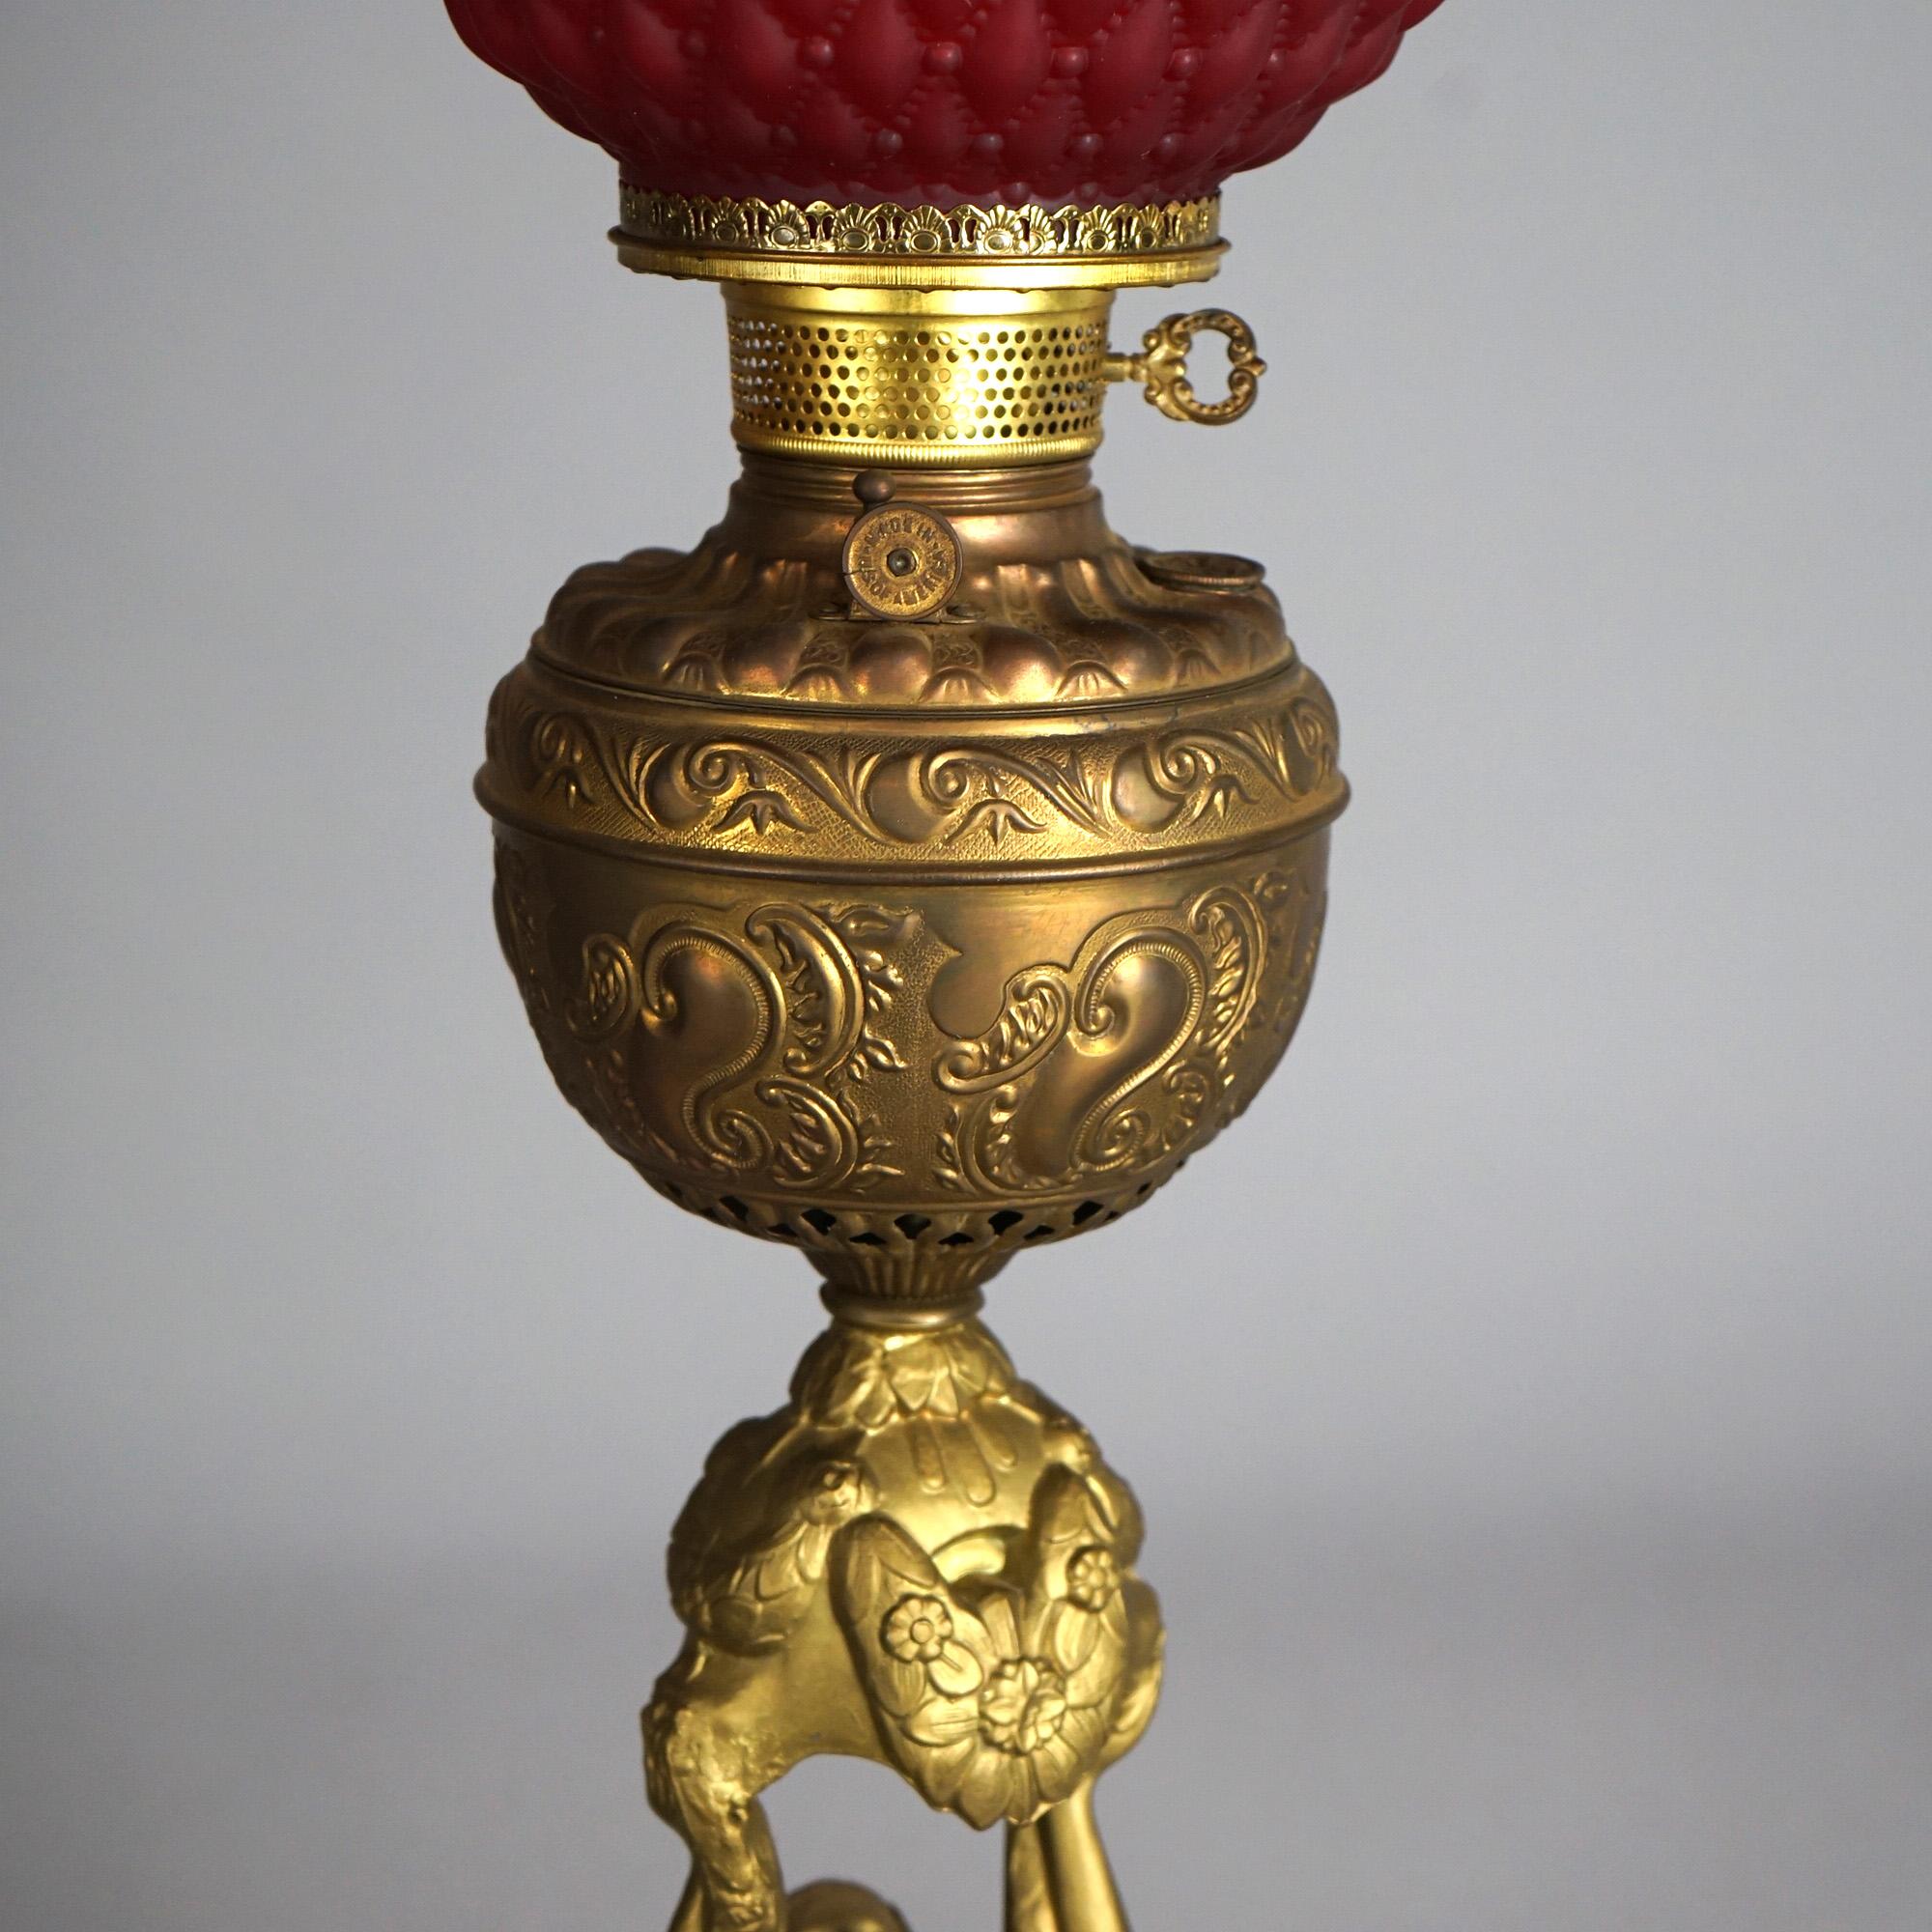 Antique Figural Gilt Metal Parlor Lamp with Quilted Red Glass Shade Circa 1900 For Sale 1